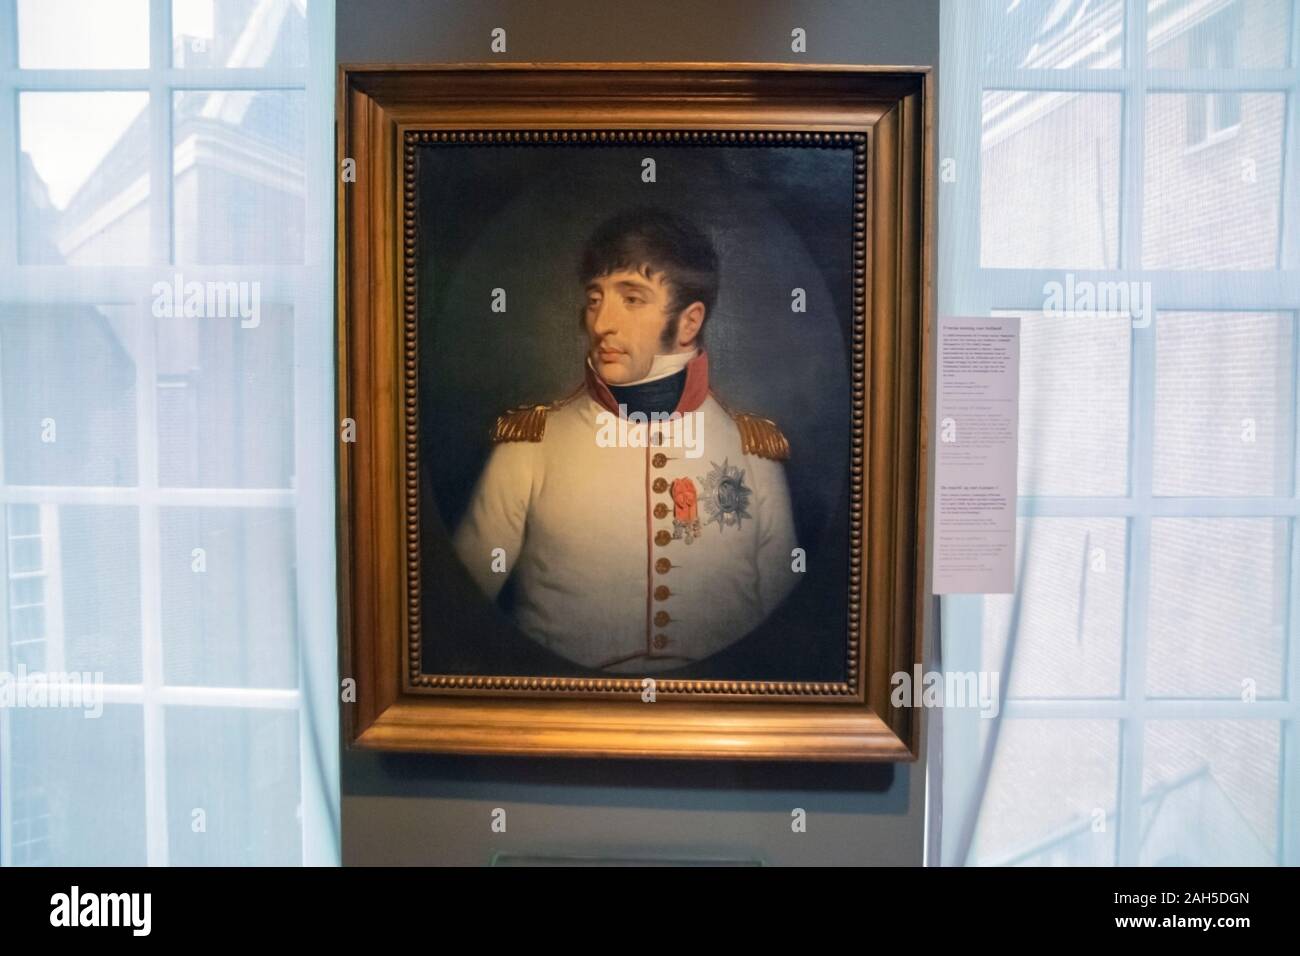 Painting Lodewijk Bonaparte At The Amsterdam Museum Amsterdam The Netherlands 2019 Stock Photo